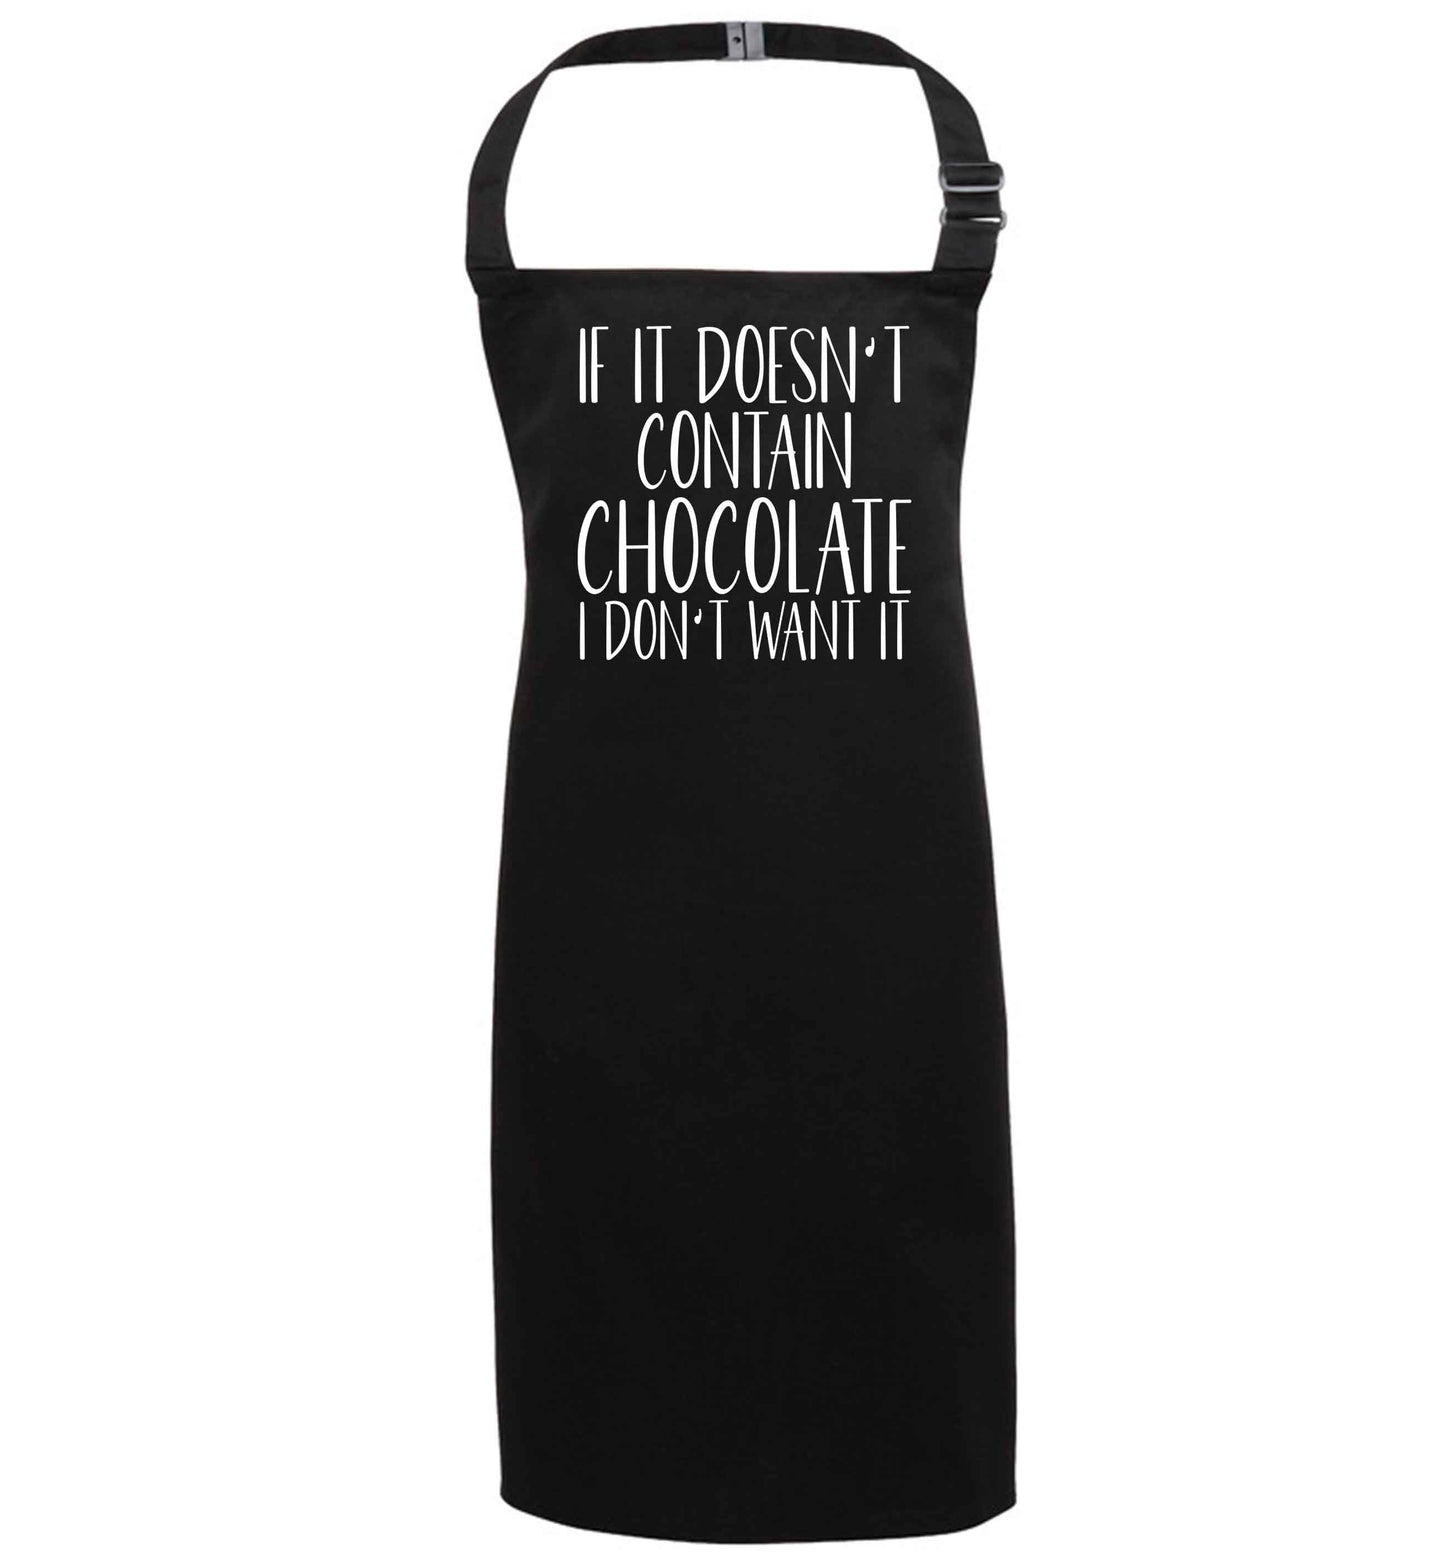 If it doesn't contain chocolate I don't want it black apron 7-10 years